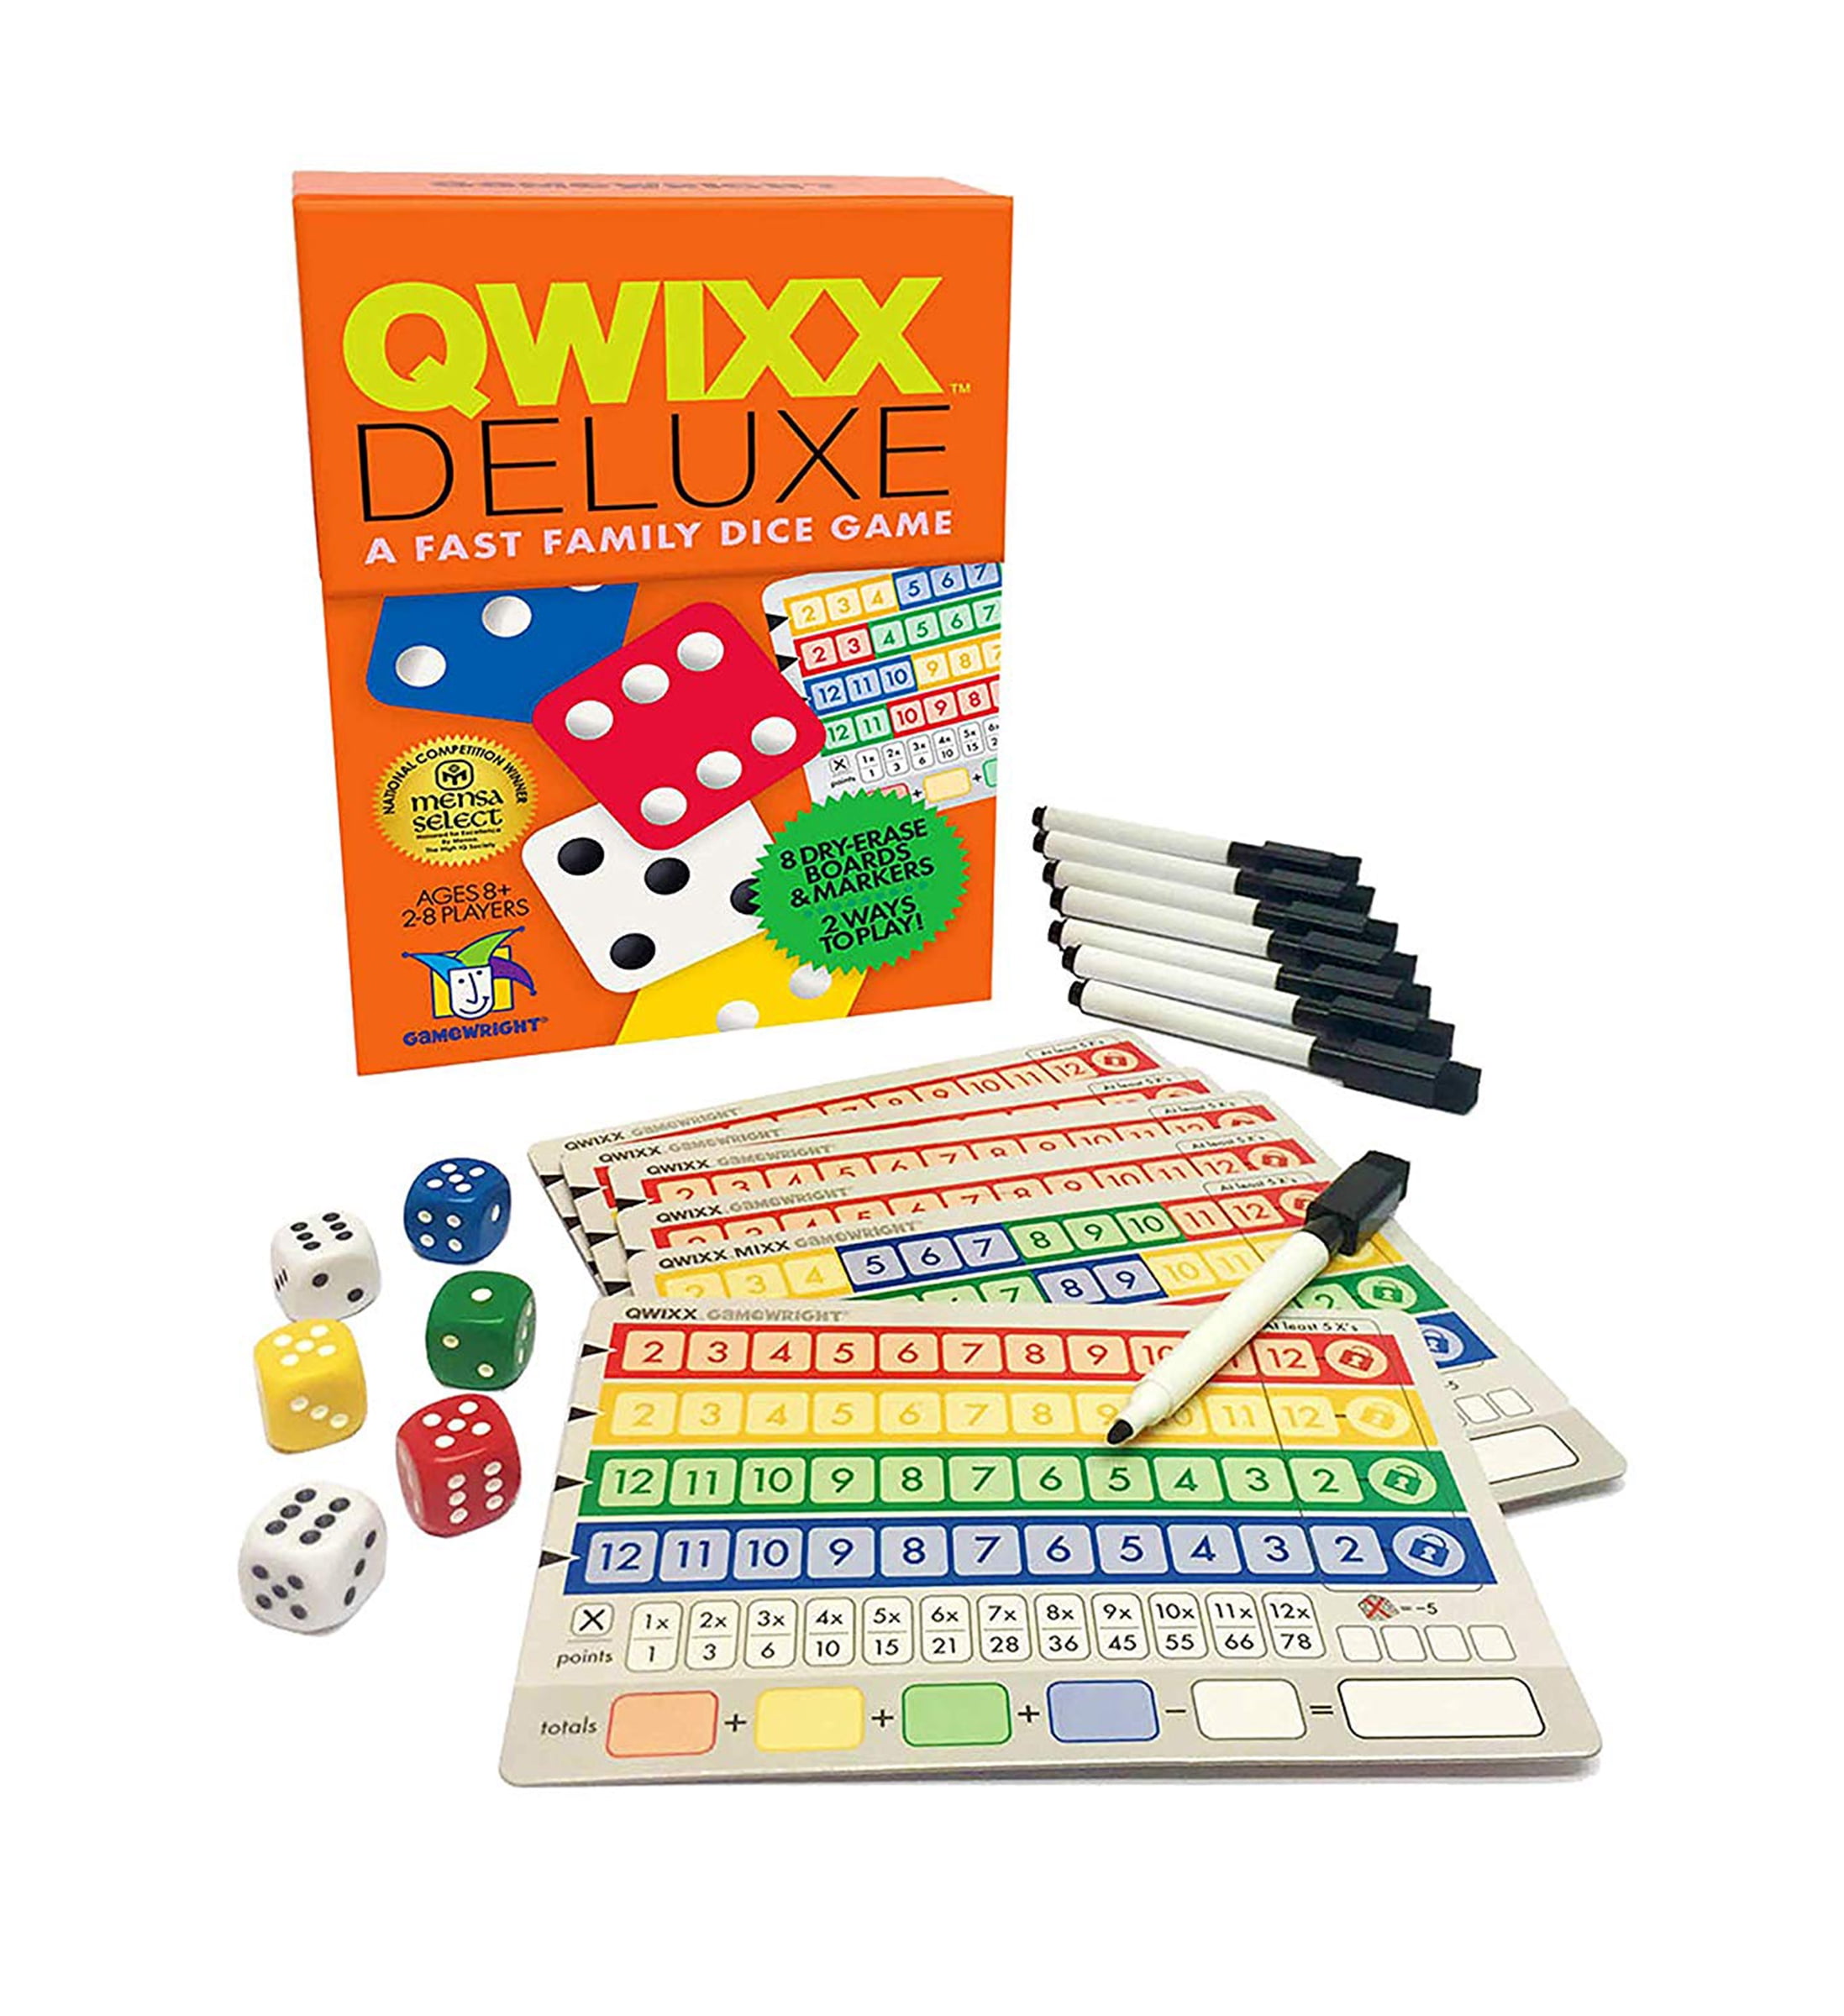 essay Claire Meetbaar Gamewright Qwixx Deluxe Fast Maily Dice Game (Multipack of 3) - Walmart.com